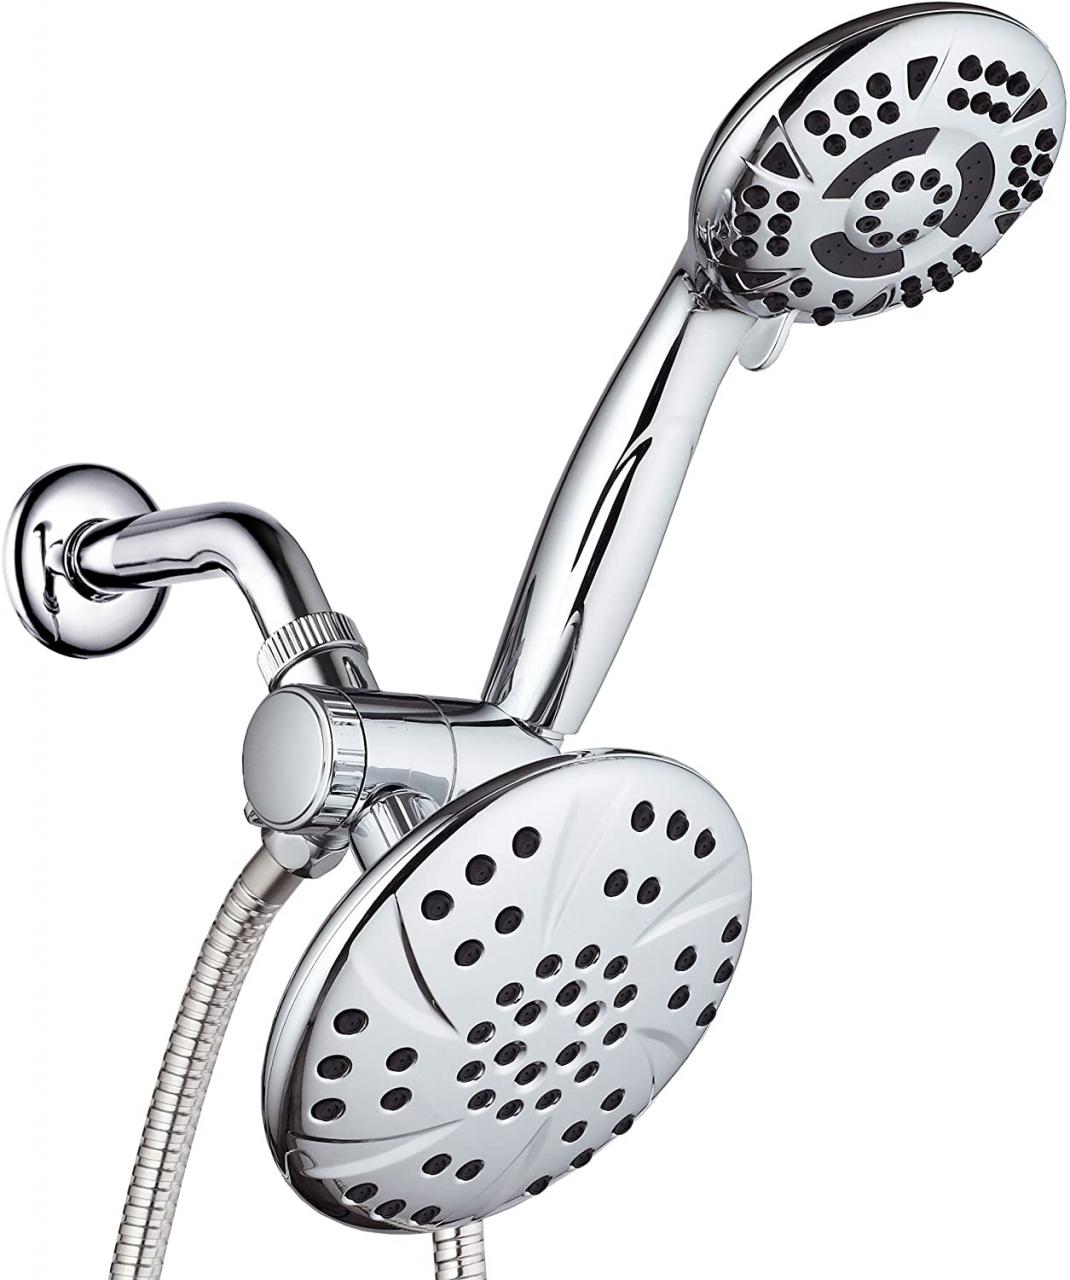 Buy AquaDance Brushed Nickel Premium High Pressure 48-setting 3-Way Combo  for The Best of Both Worlds – Enjoy Luxurious 6-setting Rain Shower Head  and 6-Setting Hand Held Shower Separately or Together Online